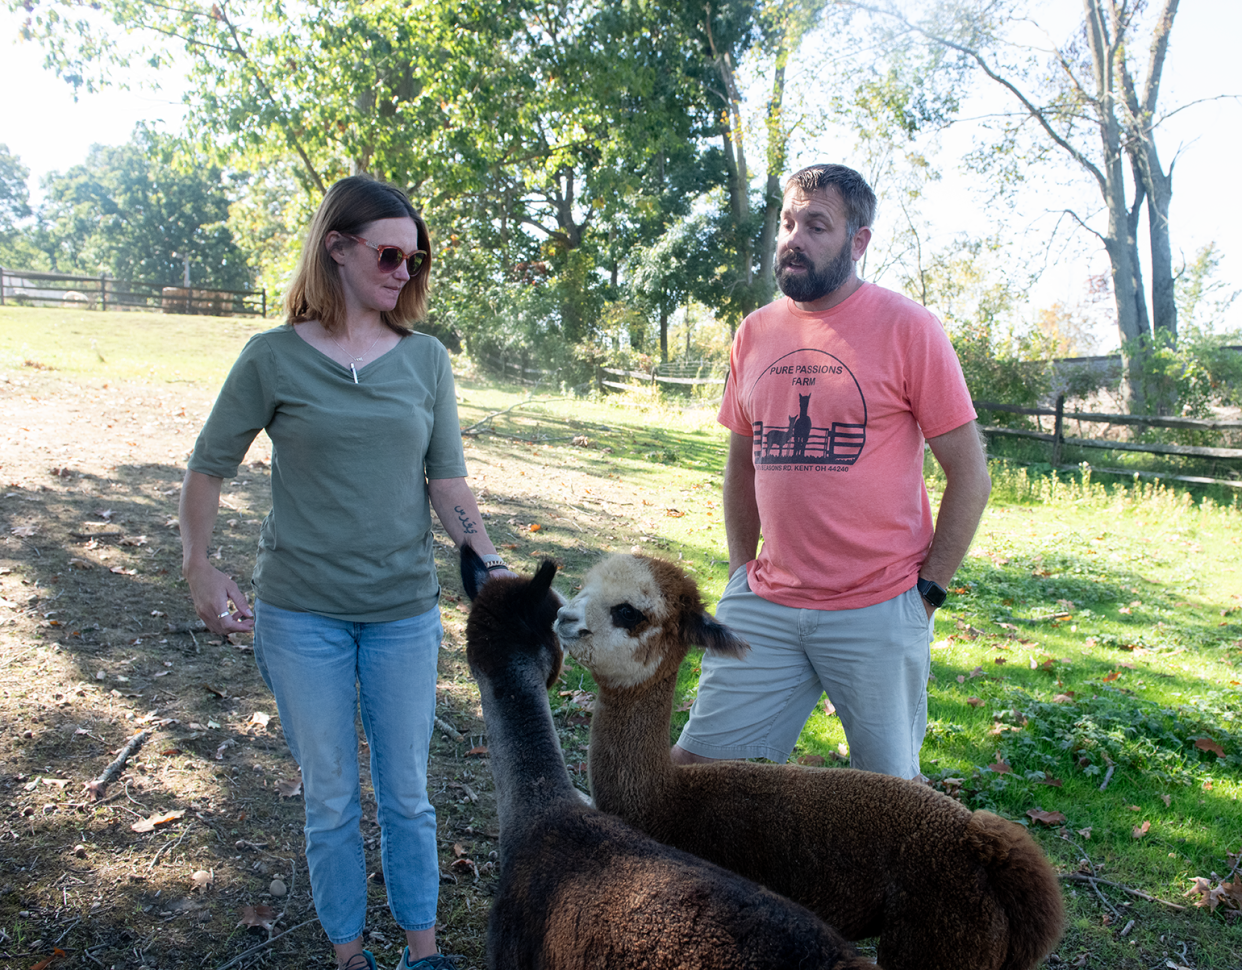 Scott and Sigga Westberg, the owners of Pure Passions Farm, with two baby alpacas, Cotton Candy and Adora, in Franklin Township.